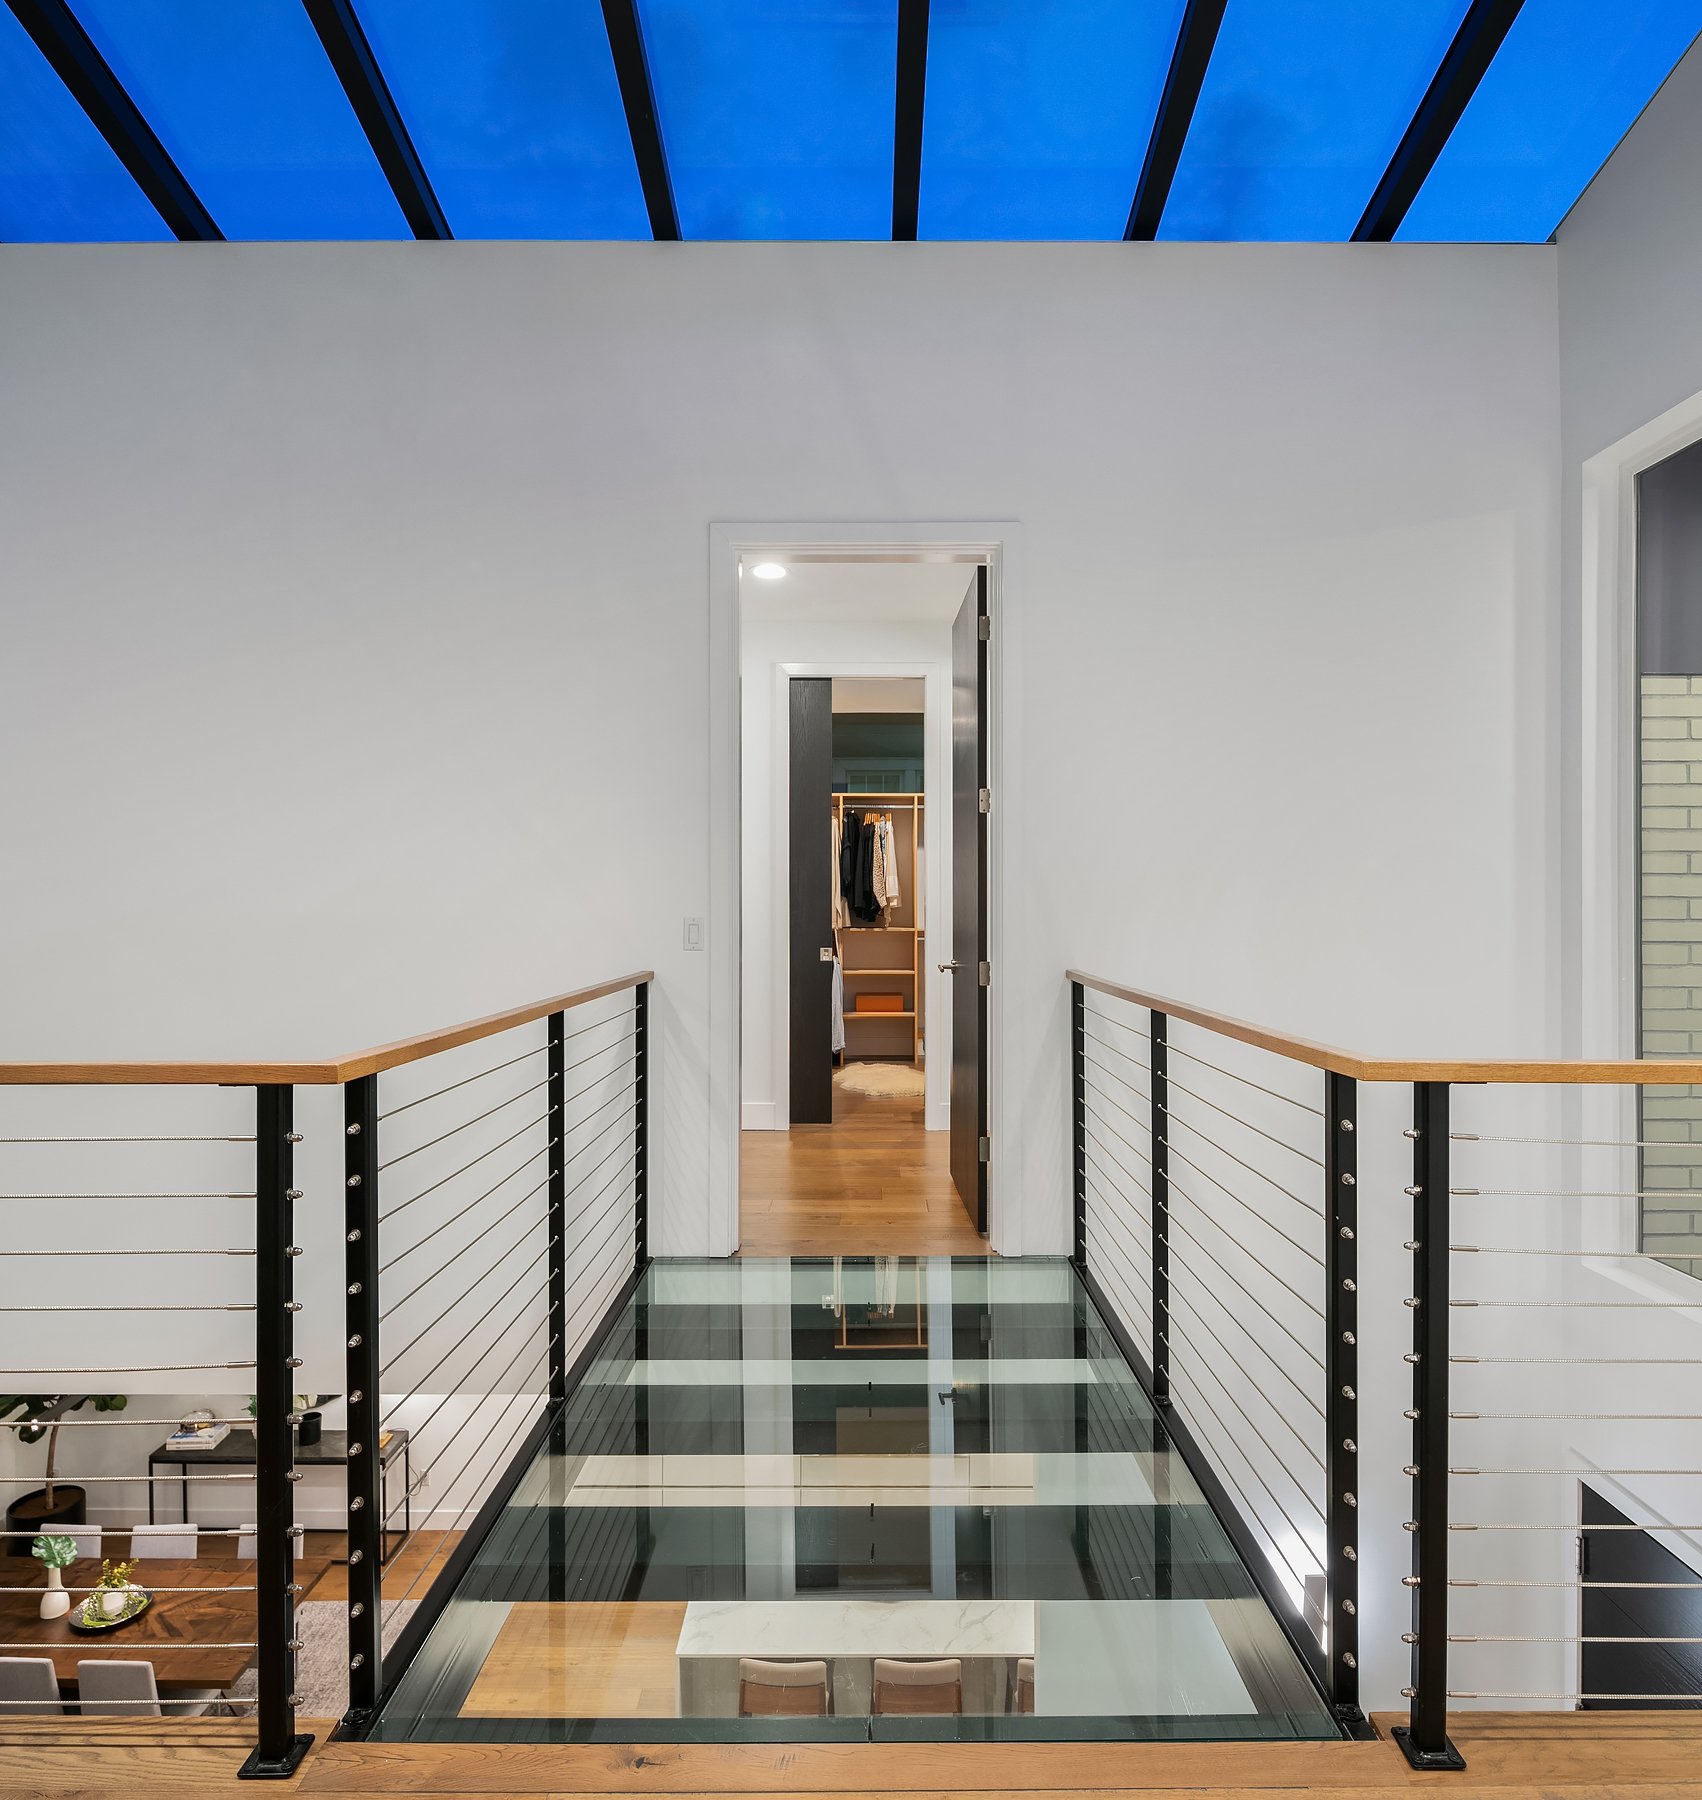  Up to the second floor… Modern stainless railings line the hall and a glass-floored bridge connects the primary bedroom to the rest of the second floor. Notice the skylights above that provide the drams and also flood the home with happy sunshine du